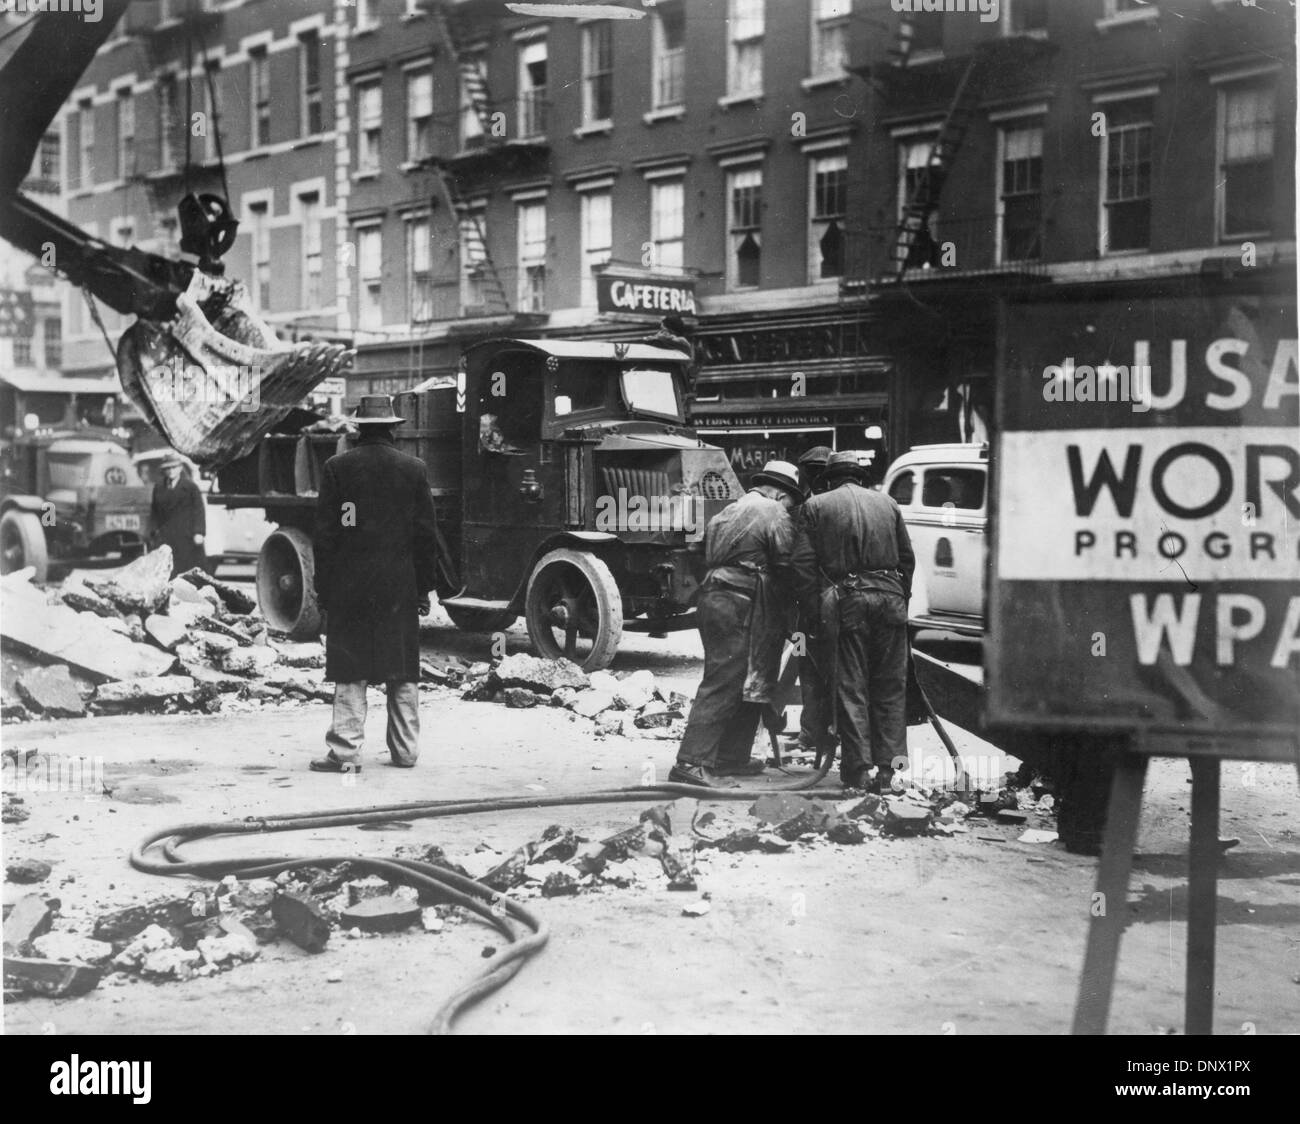 May 25, 1932 - New York, NY, U.S. - The Roosevelt administration created many jobs for the unemployed during the depression. The picture shows workers repairing New York street. (Credit Image: © KEYSTONE Pictures USA/ZUMAPRESS.com) Stock Photo